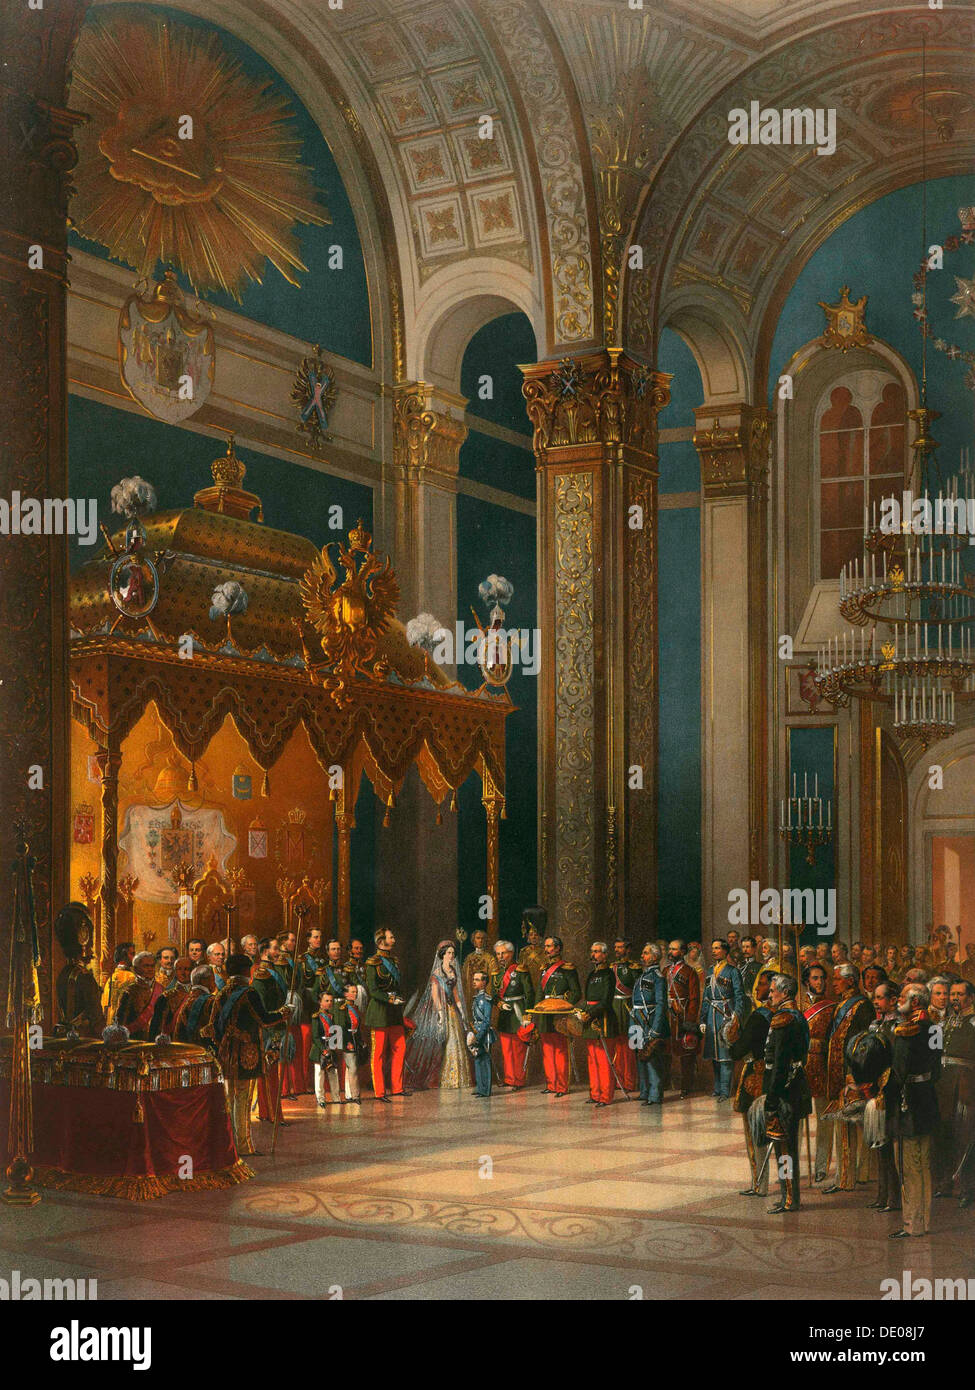 Homage of Cossack officers in the Throne Hall, coronation of Tsar Alexander II, Moscow, 1856.  Artist: Georg Wilhelm Timm Stock Photo